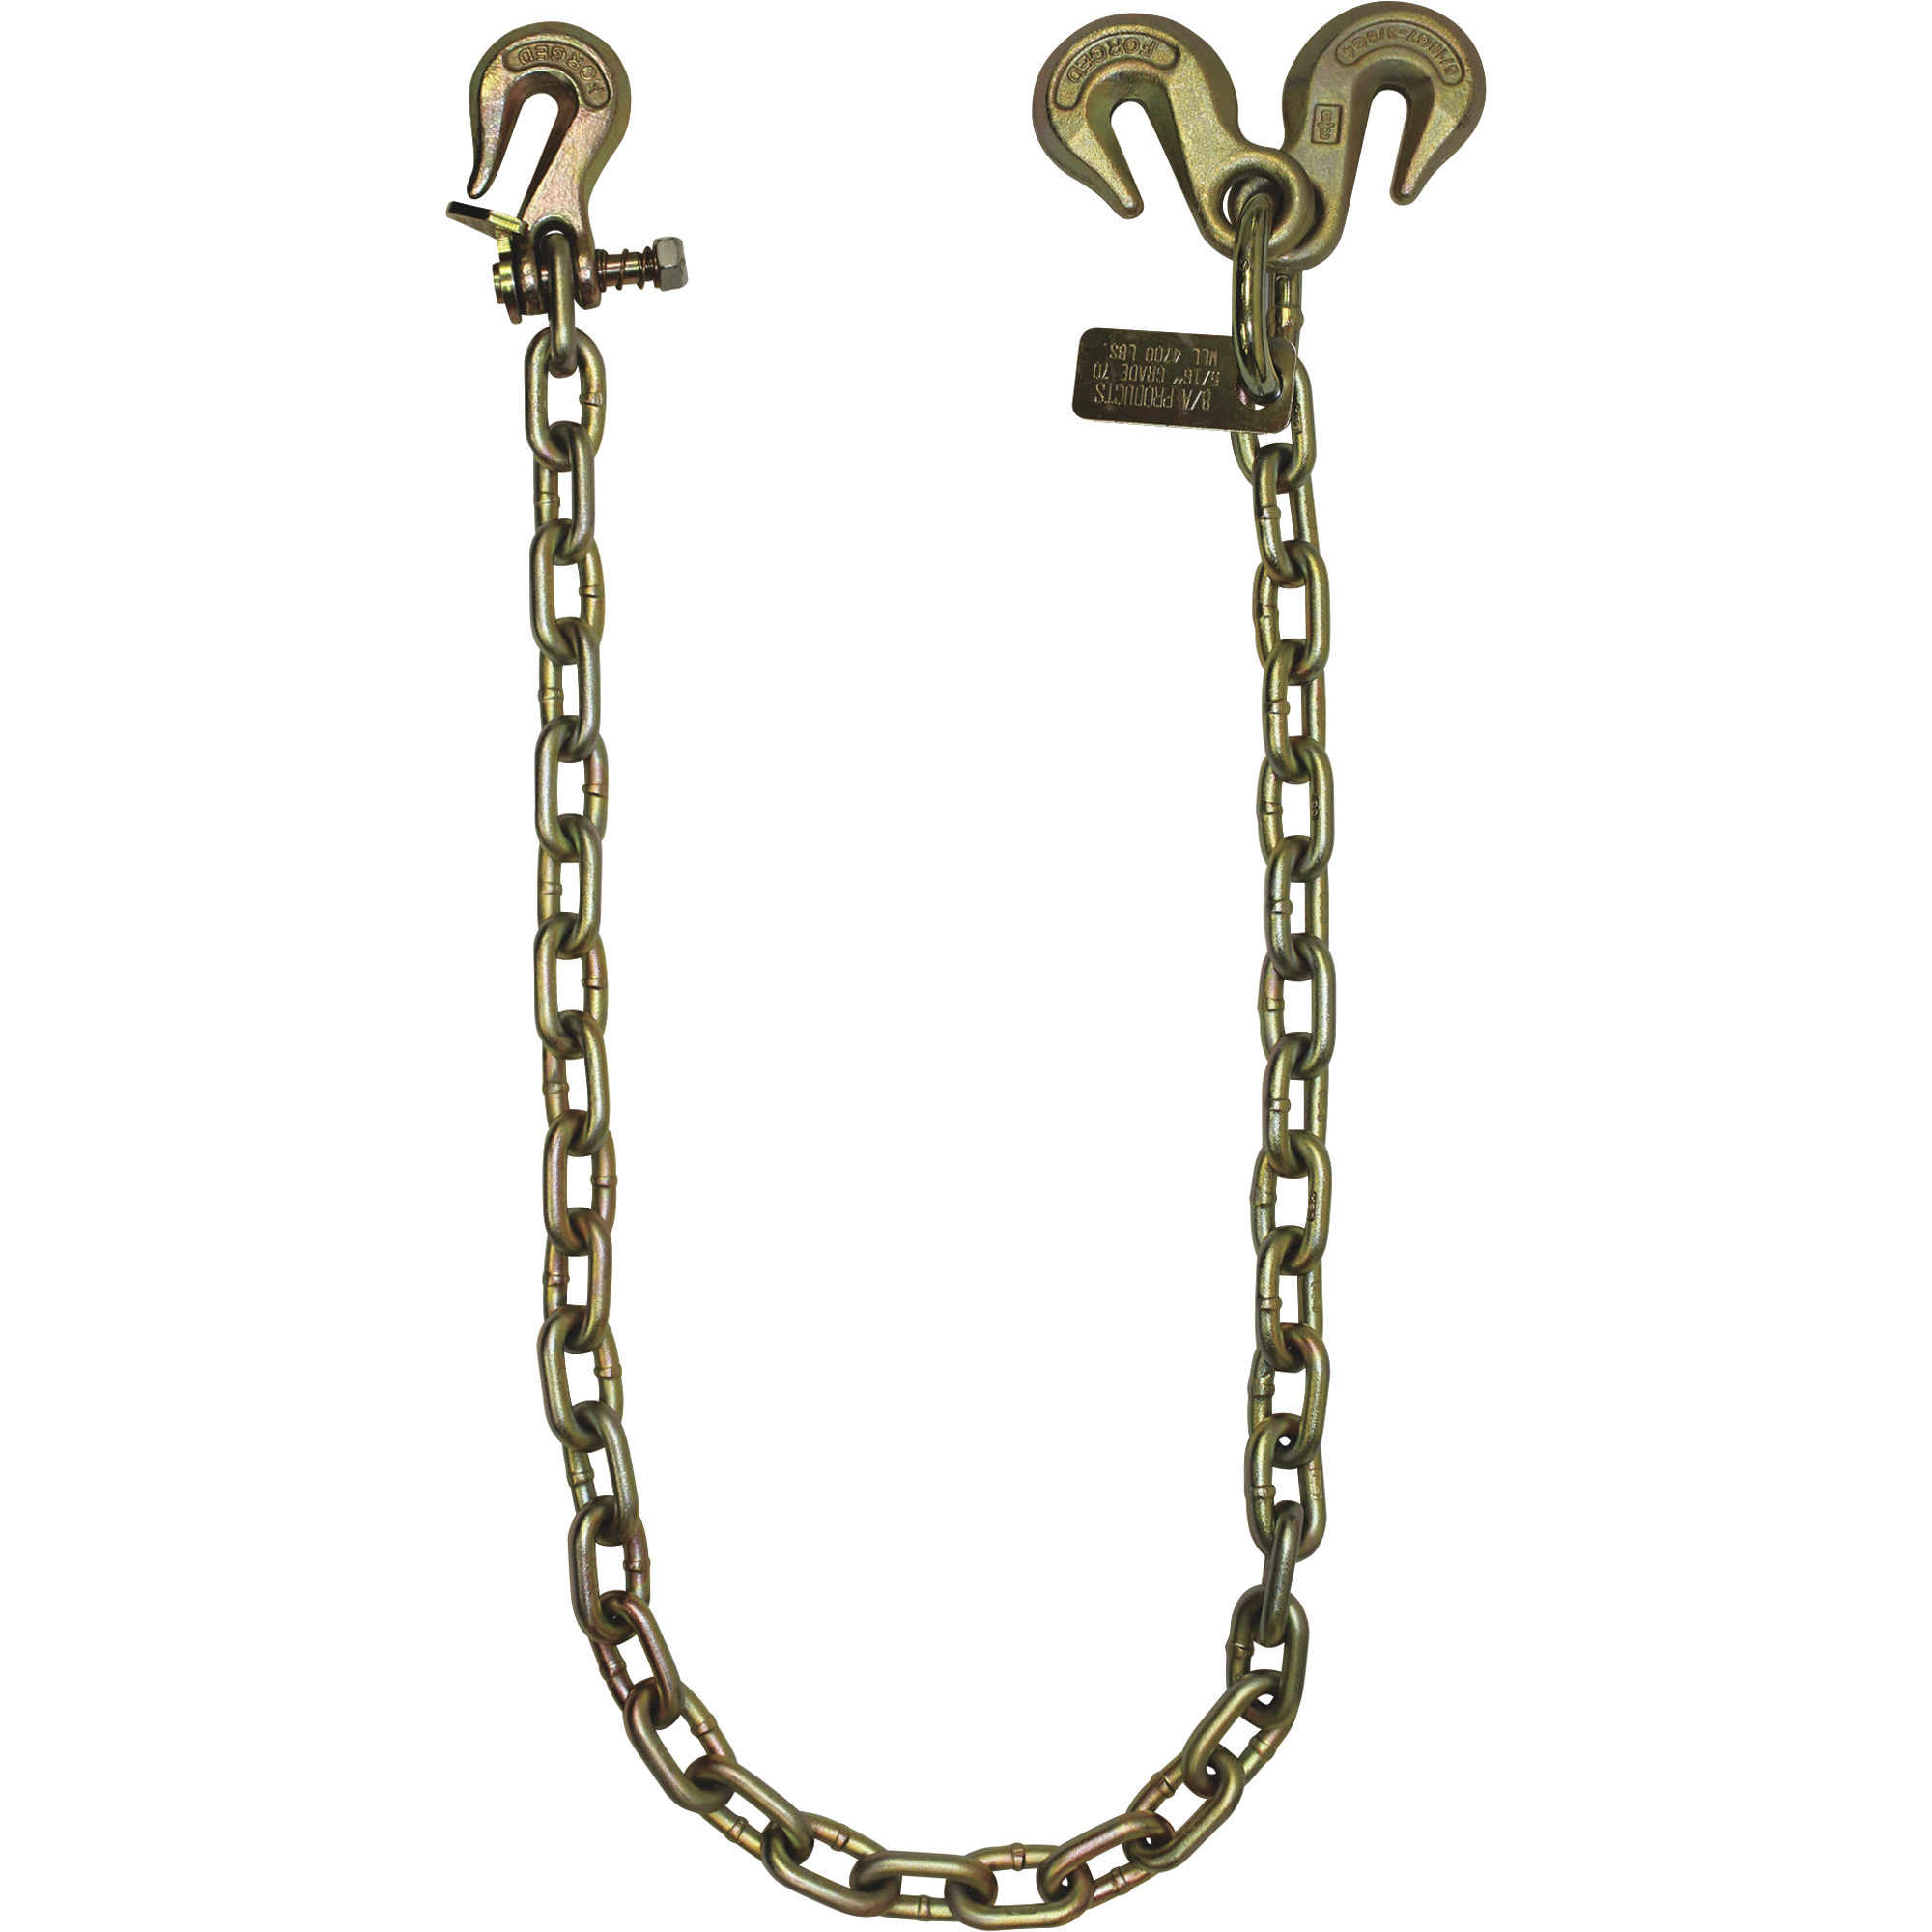 B/A Products Axle Chain â 4-Ft. Chain With Twist Lock Grab Hook and 2 Grab Hooks, Model N711-AC4TL